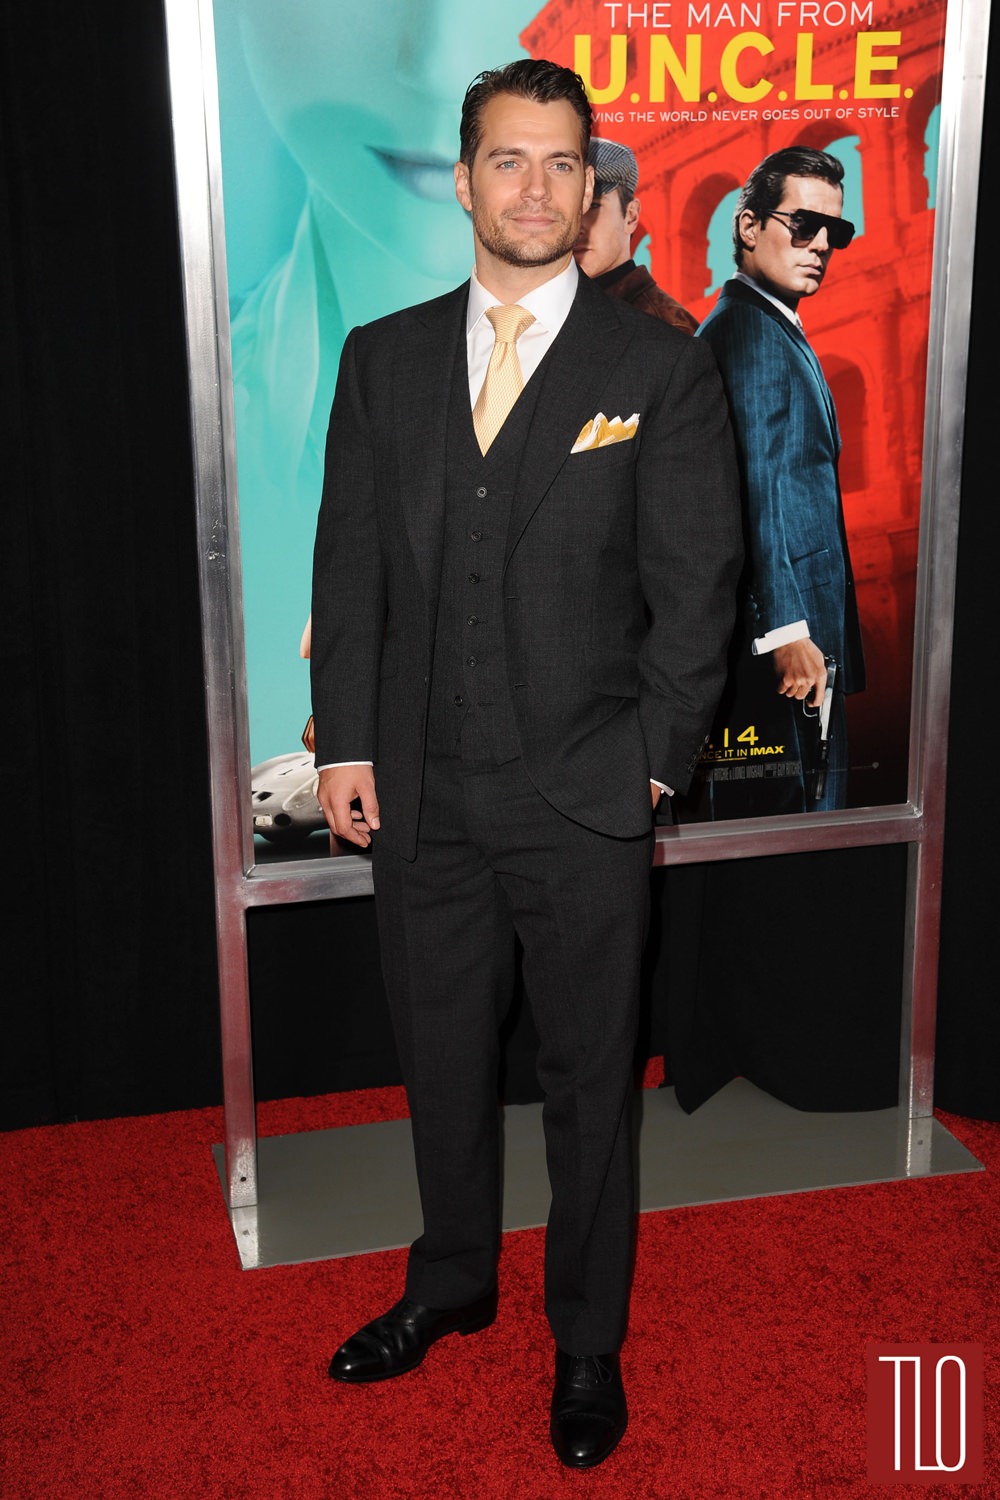 Henry-Cavill-The-Man-from-UNCLE-New-York-Movie-Premiere-Red-Carpet-Fashion-Dunhill-Tom-Lorenzo-Site-TLO (1)